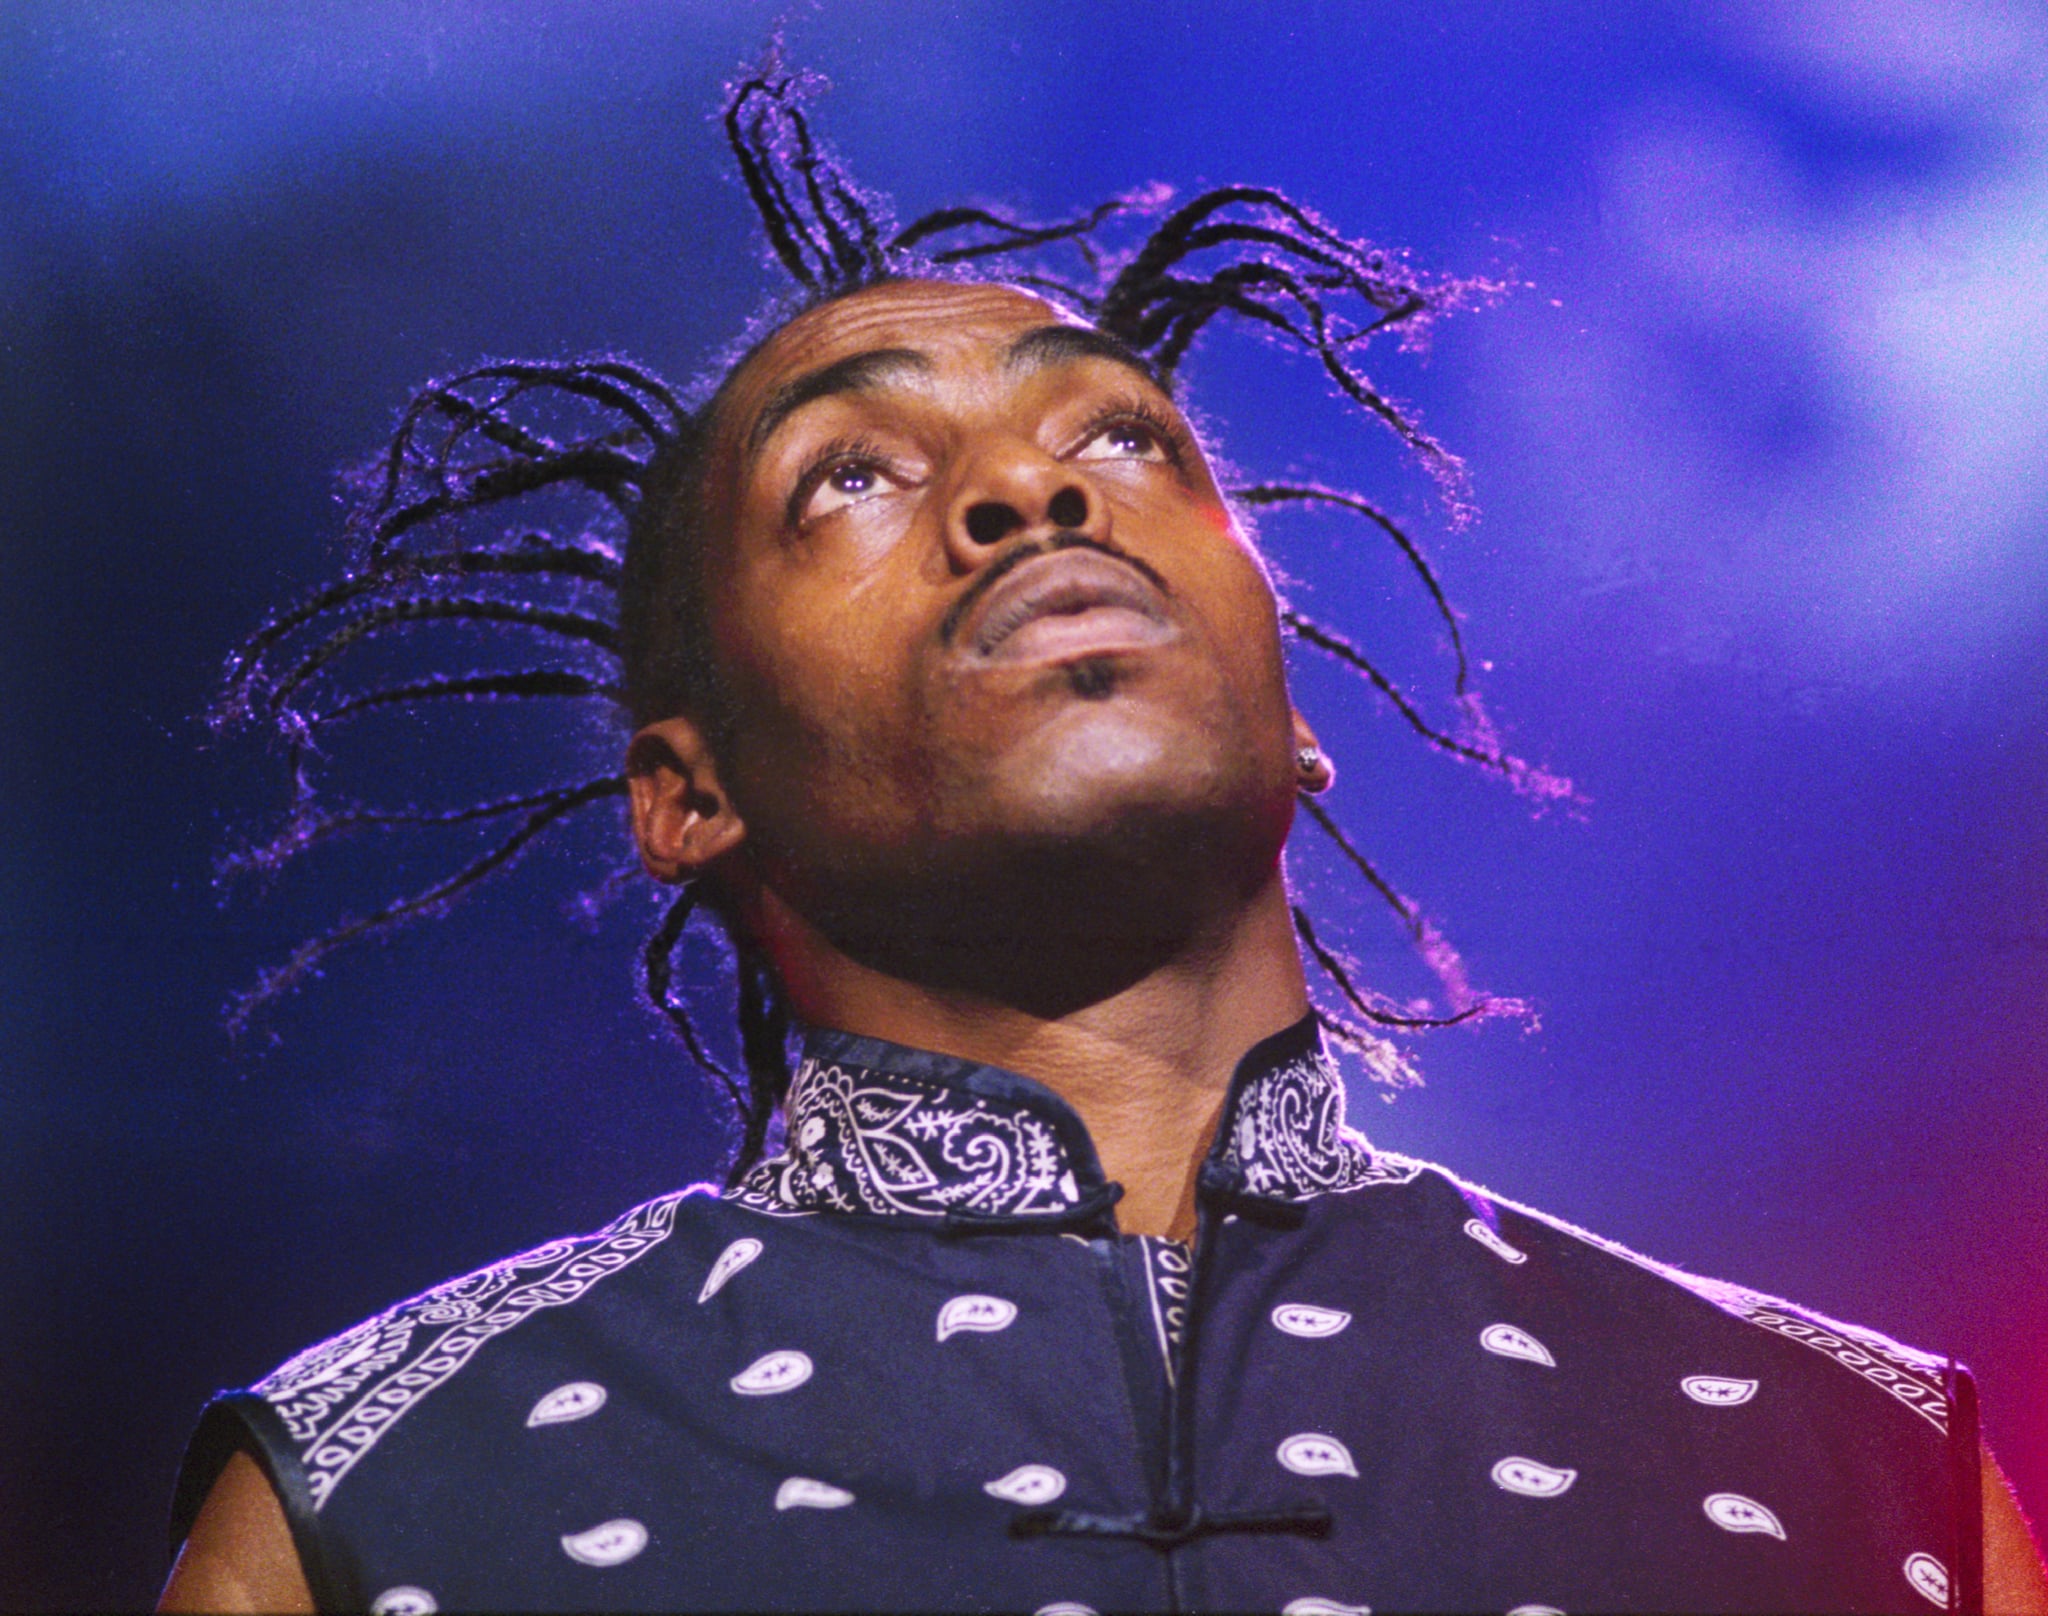 The Story Behind Coolio’s “Gangsta’s Paradise”